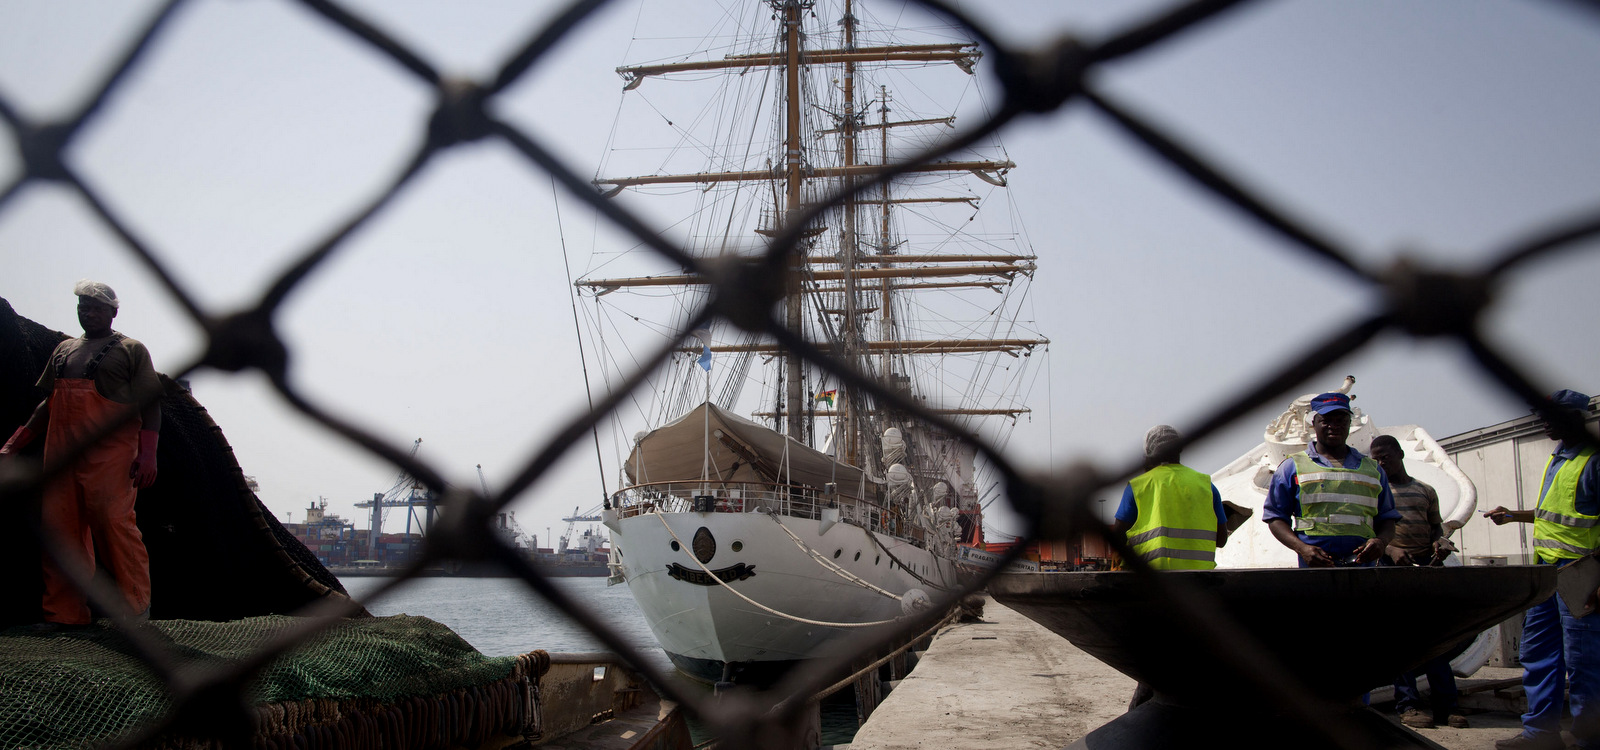 Argentina's three-masted navy training tall ship ARA Libertad, which was seized on Oct. 2 as collateral for unpaid bonds dating from Argentina's economic crisis a decade ago, sits docked at the port in Tema, outside Accra, in Ghana Friday, Dec. 14, 2012. (AP/Gabriela Barnuevo)